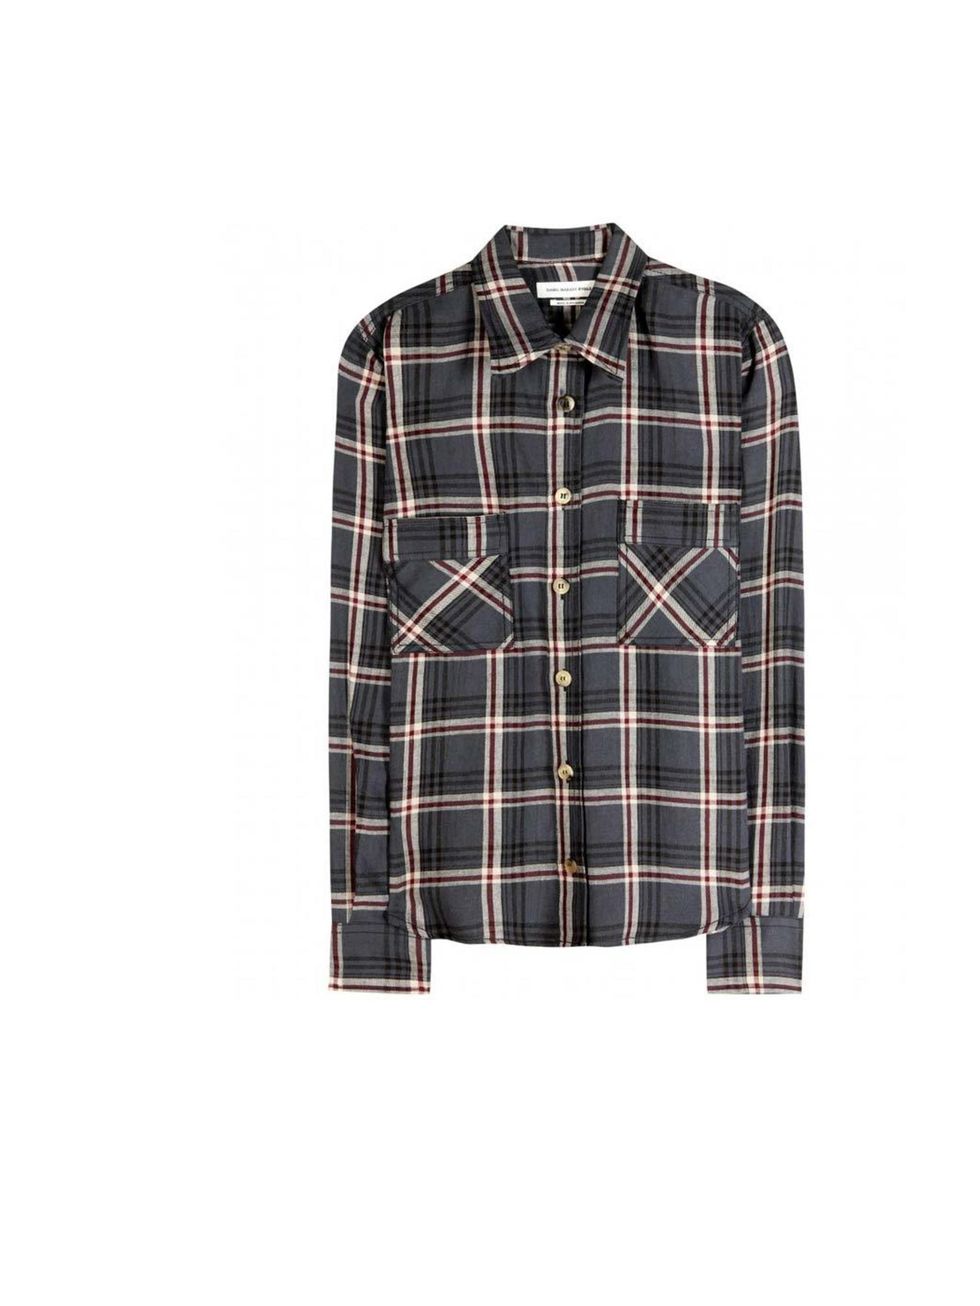 <p>When it comes to casual cool the checked shirt is your go-to. Perfect for transeasonal looks, dress it down with denim or luxe it up with a tailored trouser. Check it out</p><p>This one is Marant Etoile, £250 available at <a href="http://www.mytheresa